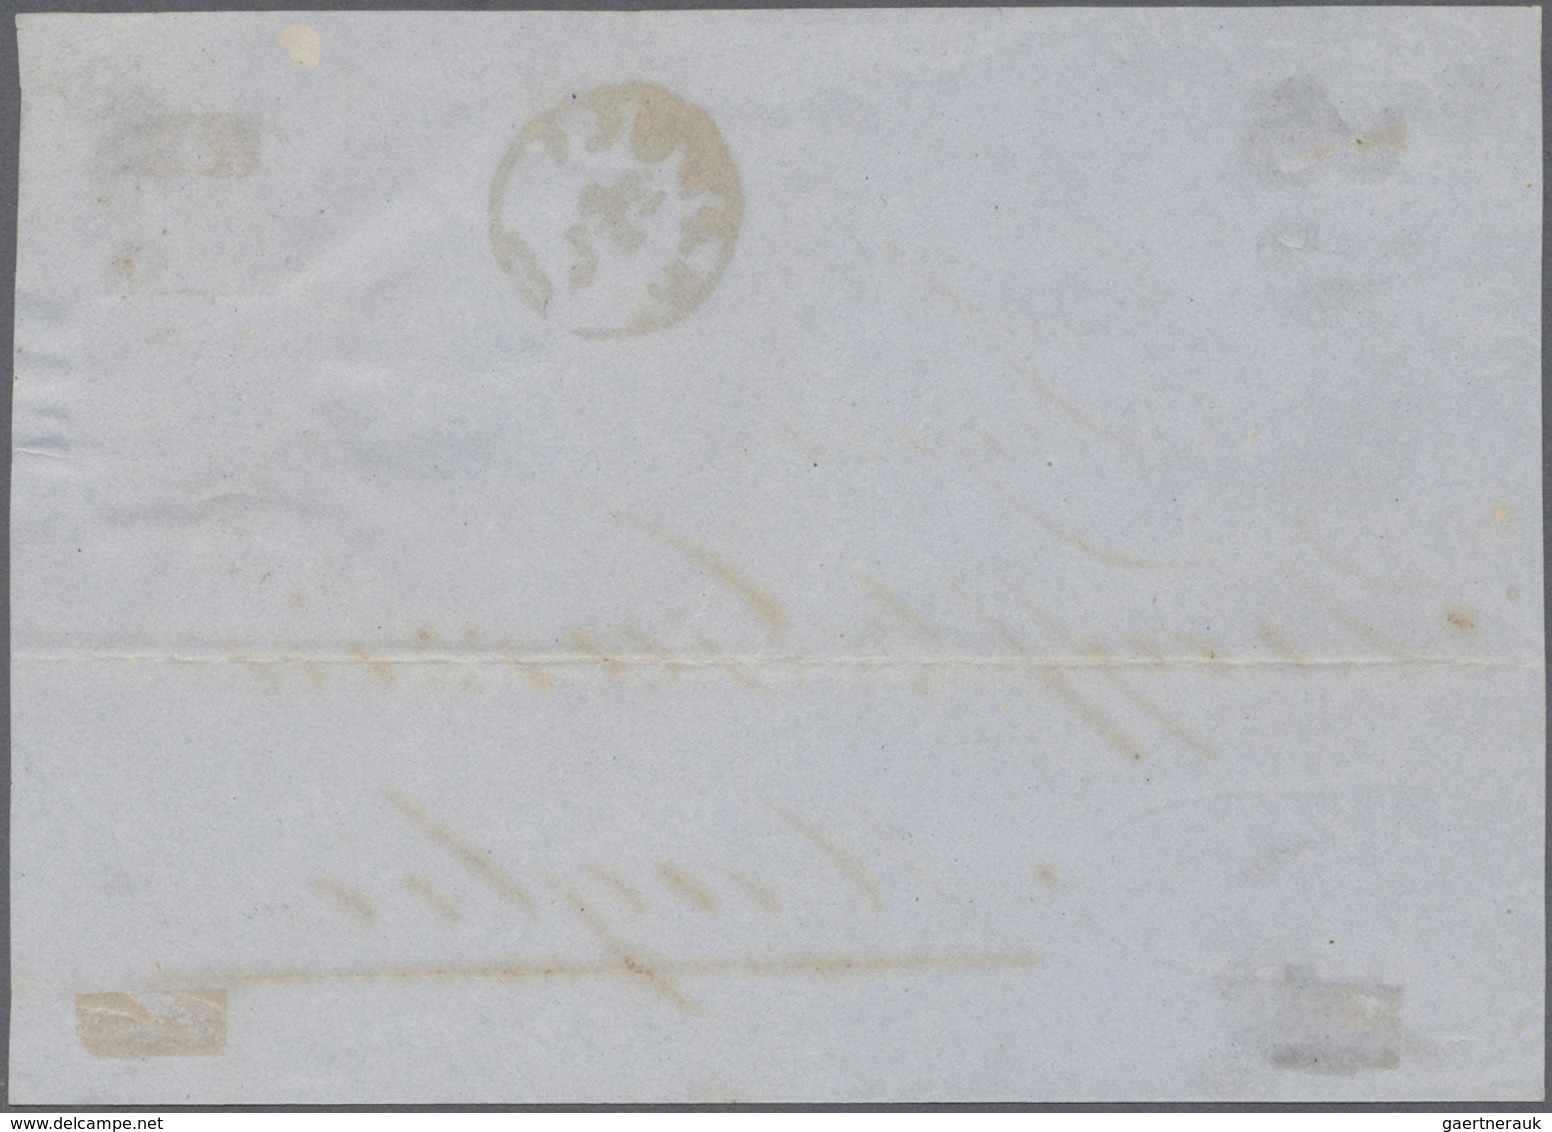 01053 Italien - Besonderheiten: 1864, Front Of A Cover From Naples To Maglie Franked With The Naples 2 Gra - Non Classificati